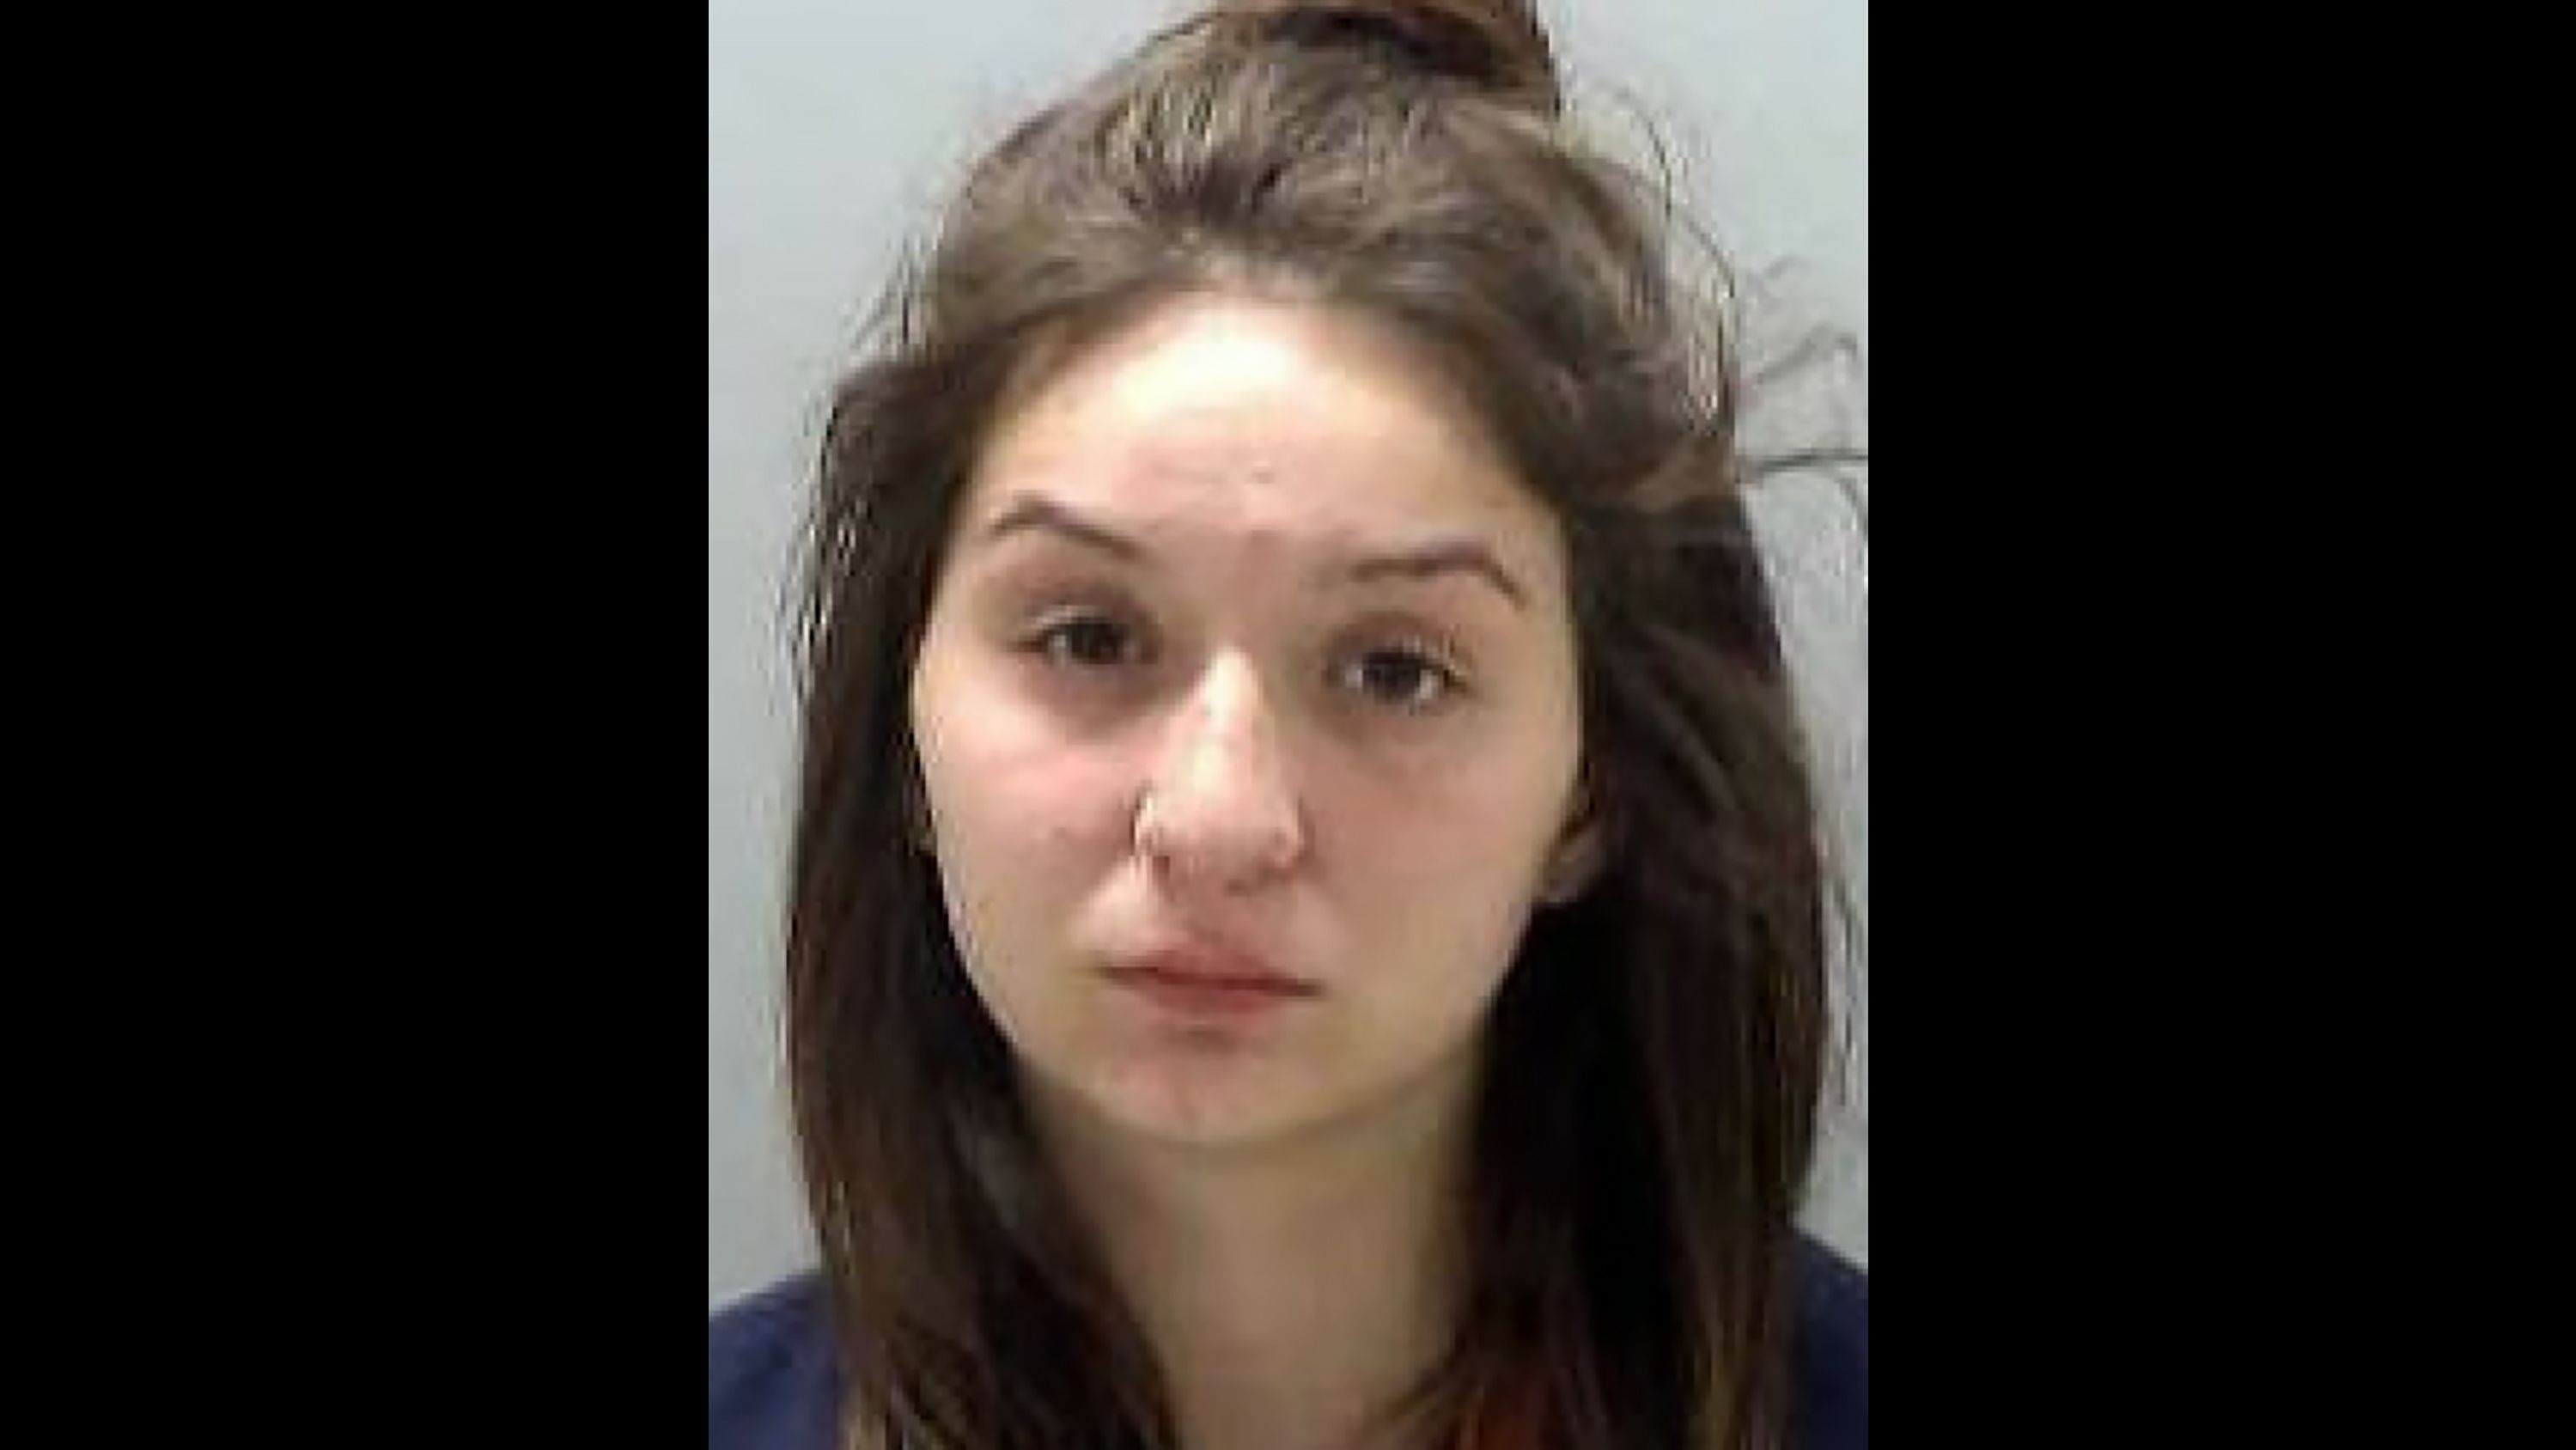 Monalisa Perez, 19, has been charged with second degree manslaughter.